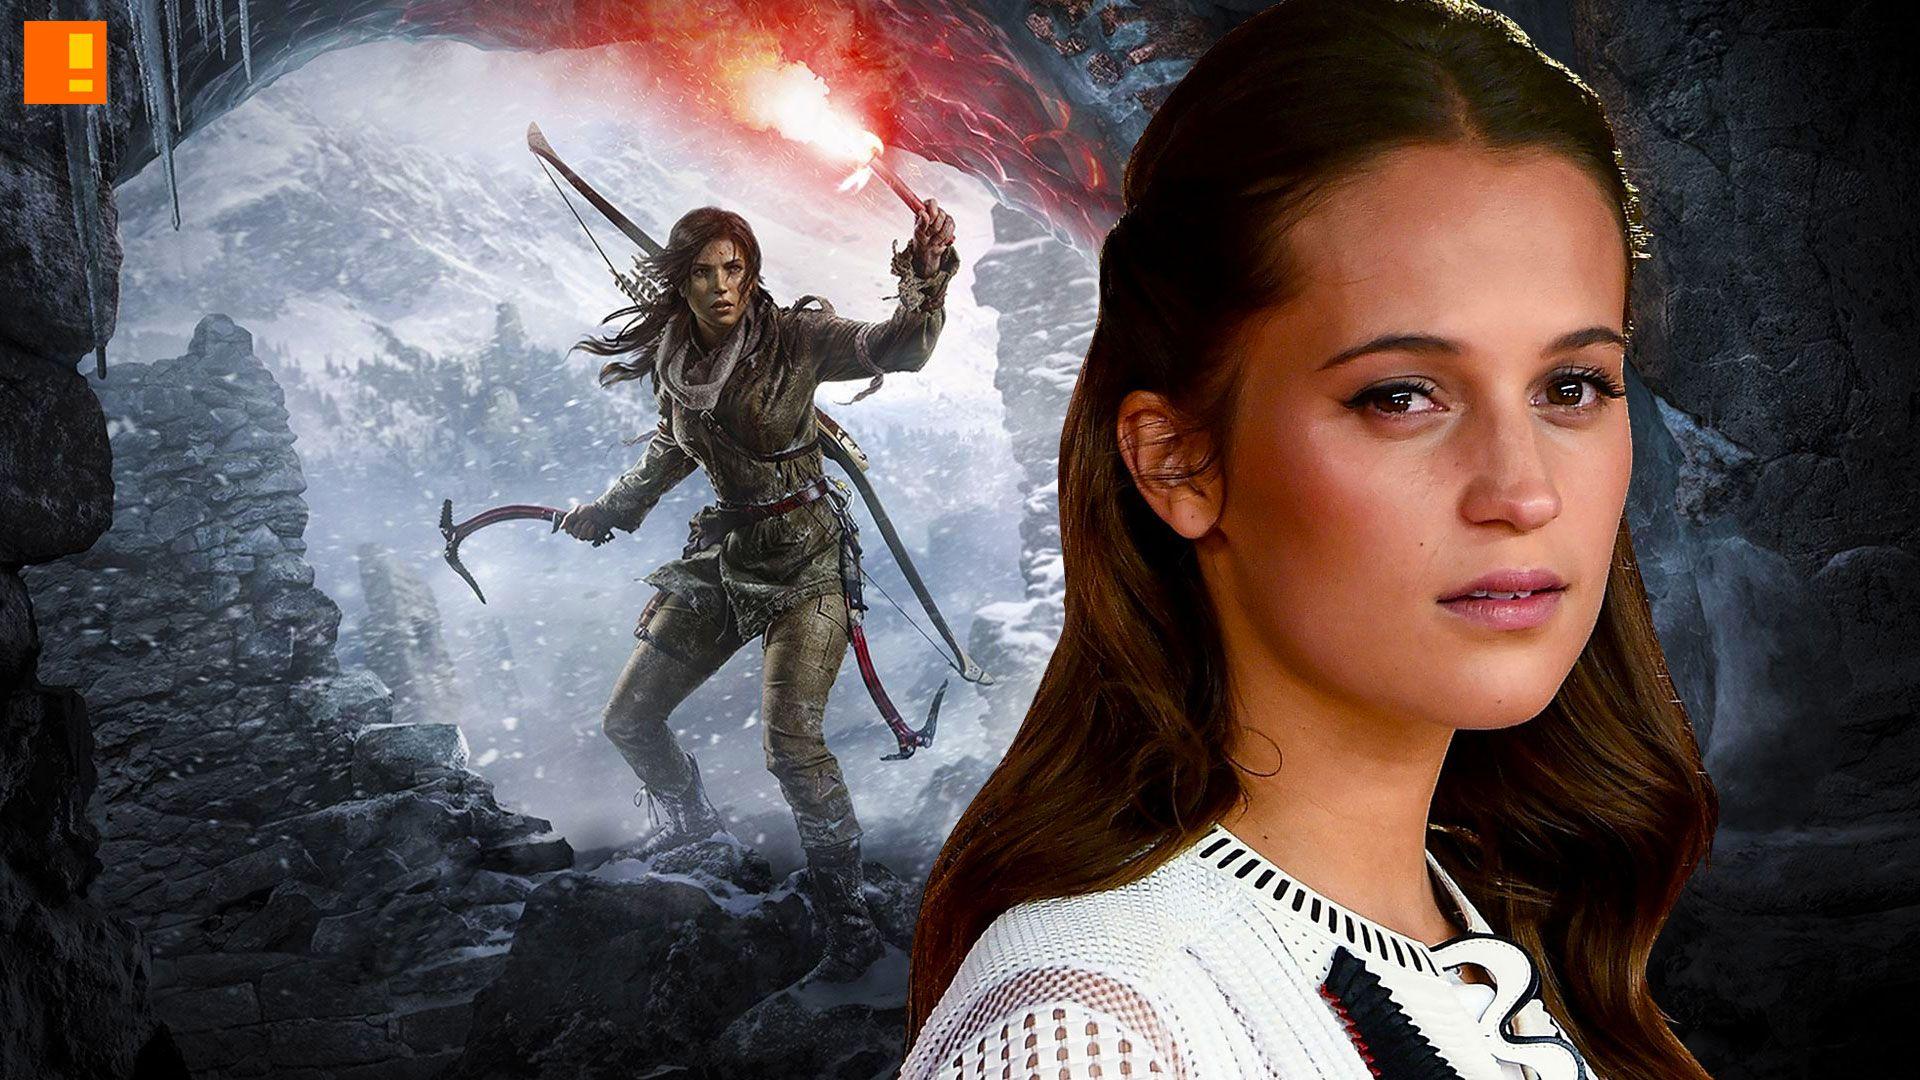 Alicia Vikander gets into character as Lara Croft in recent “Tomb